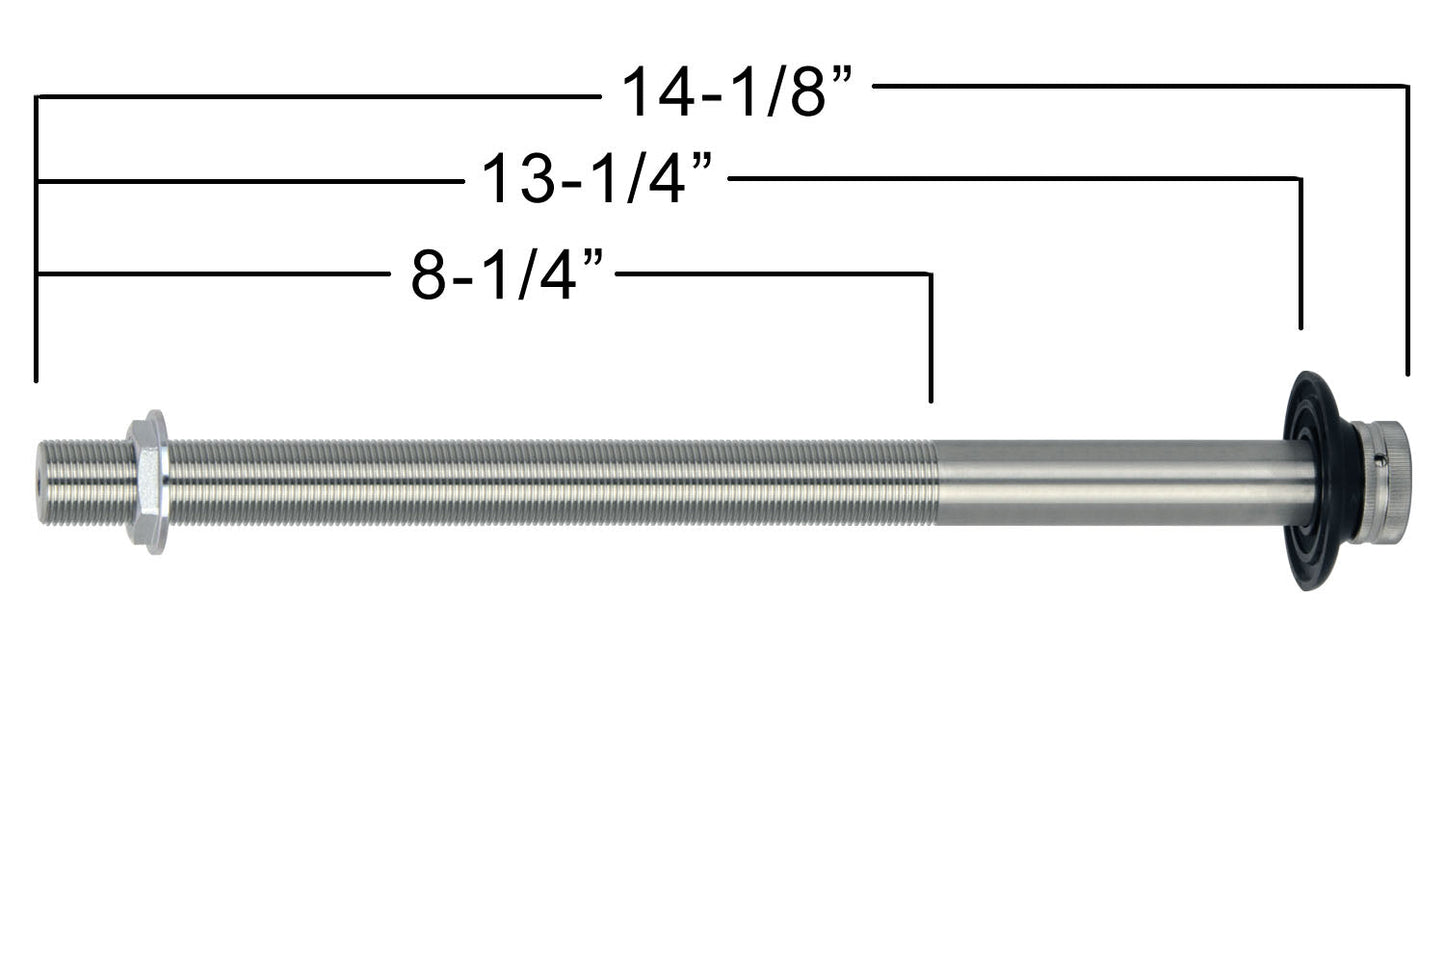 14-1/8" Stainless Steel Shank - 1/4" I.D. Bore